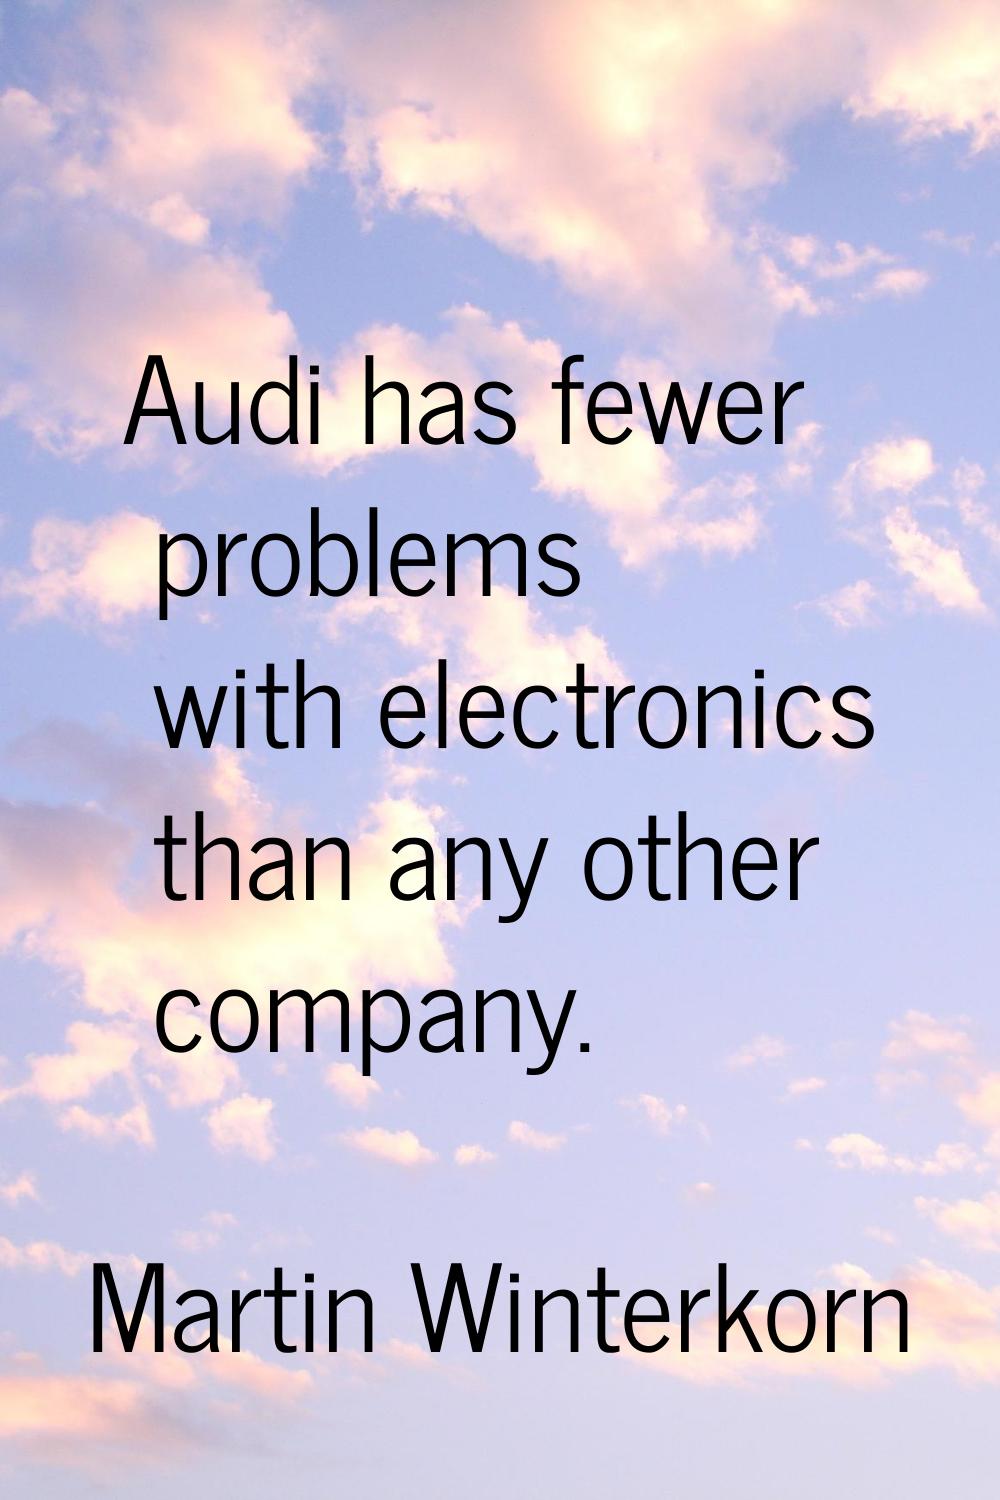 Audi has fewer problems with electronics than any other company.